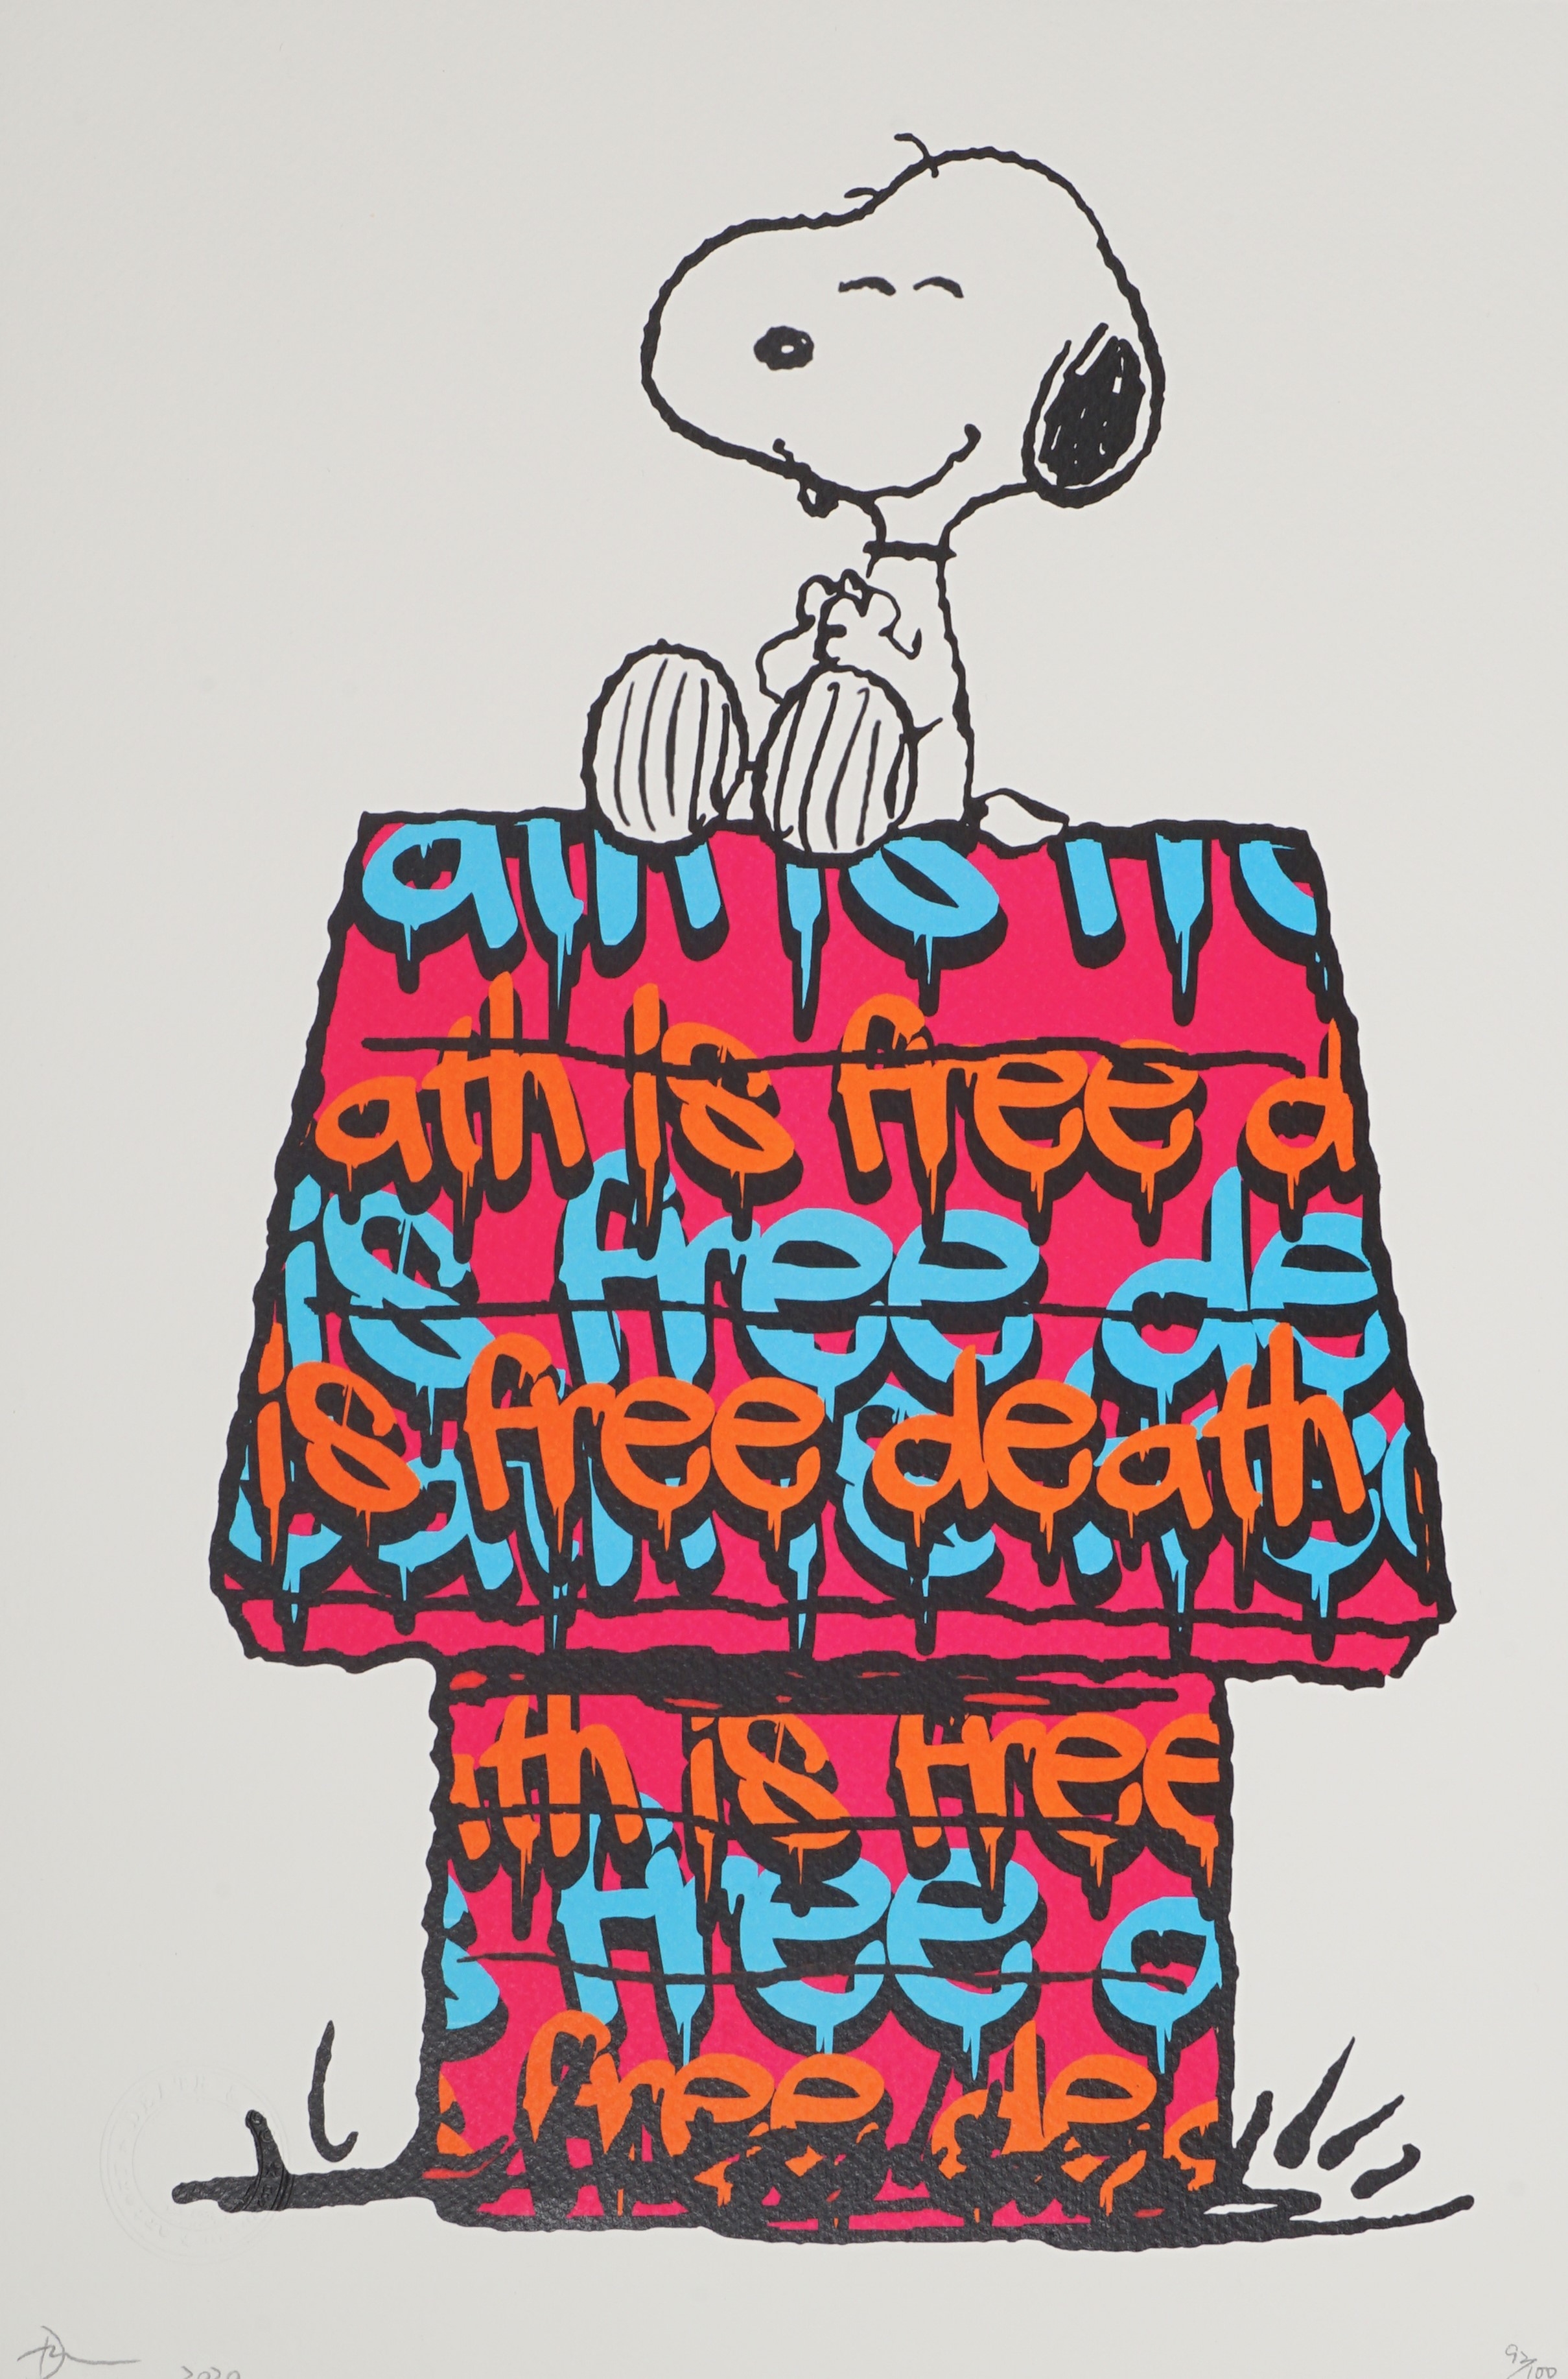 Death Nyc Snoopy Peanuts Keith Haring Art Poster